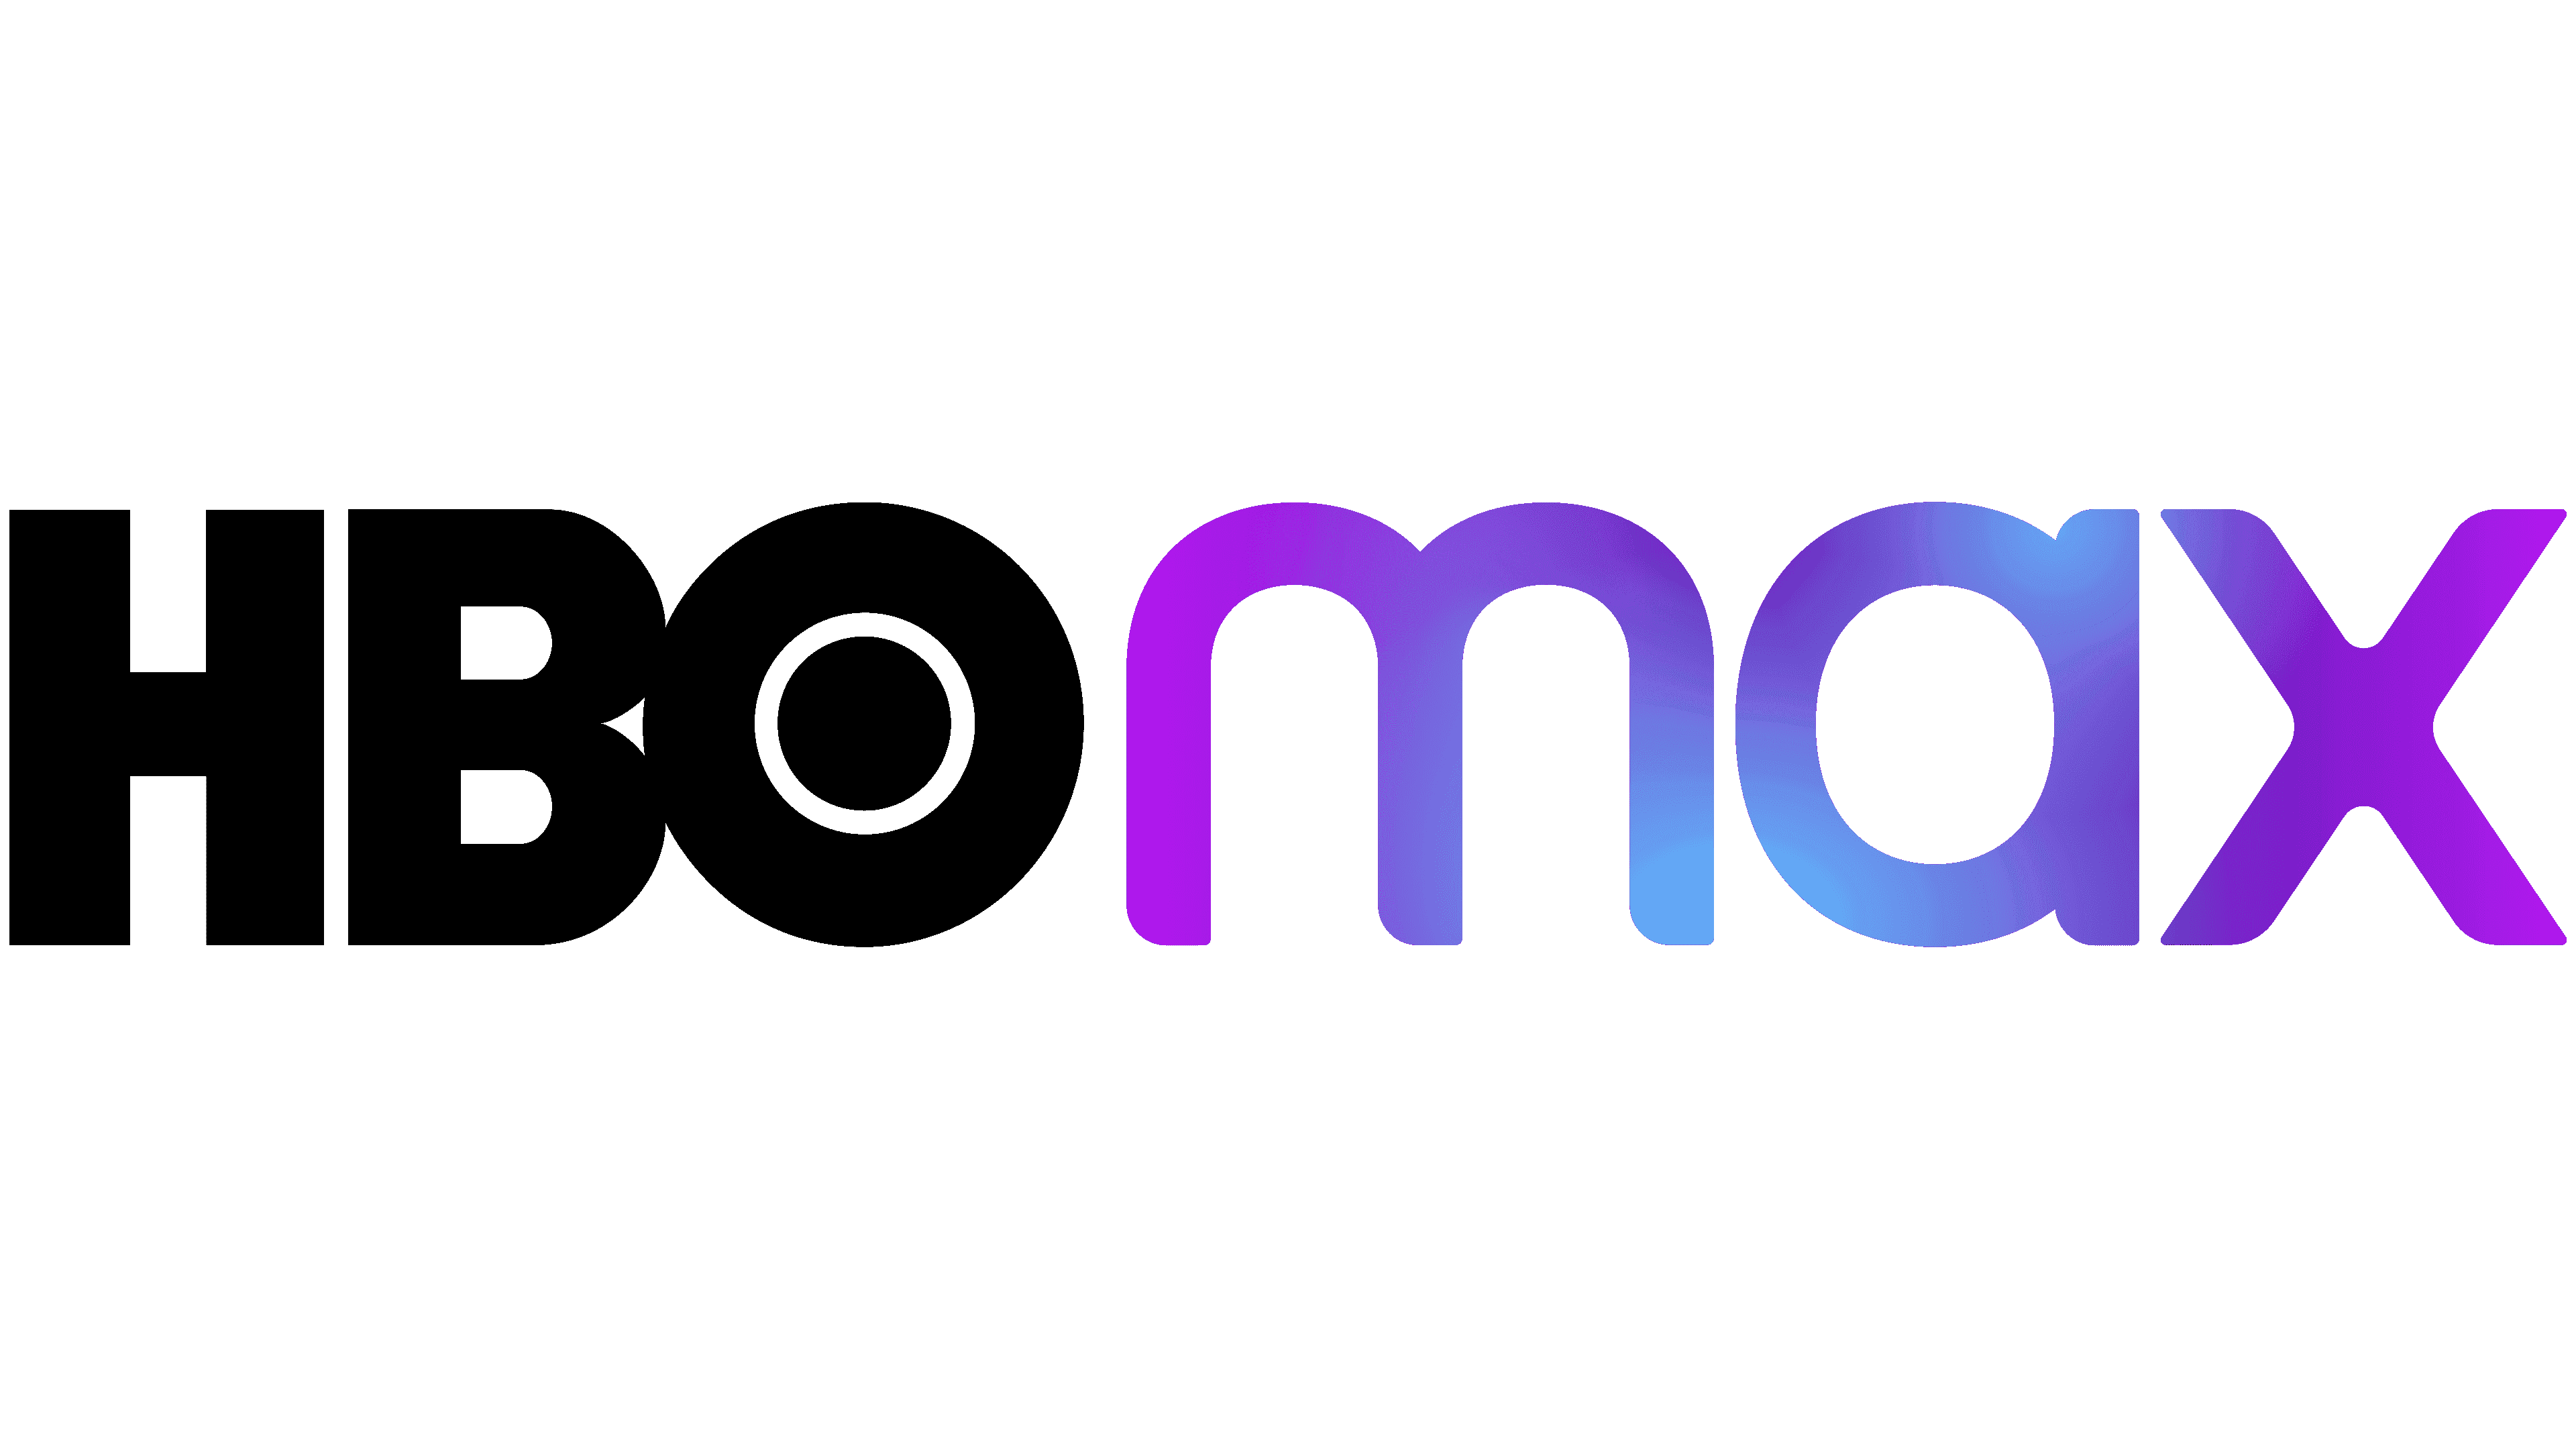 Download Movies on HBO Max